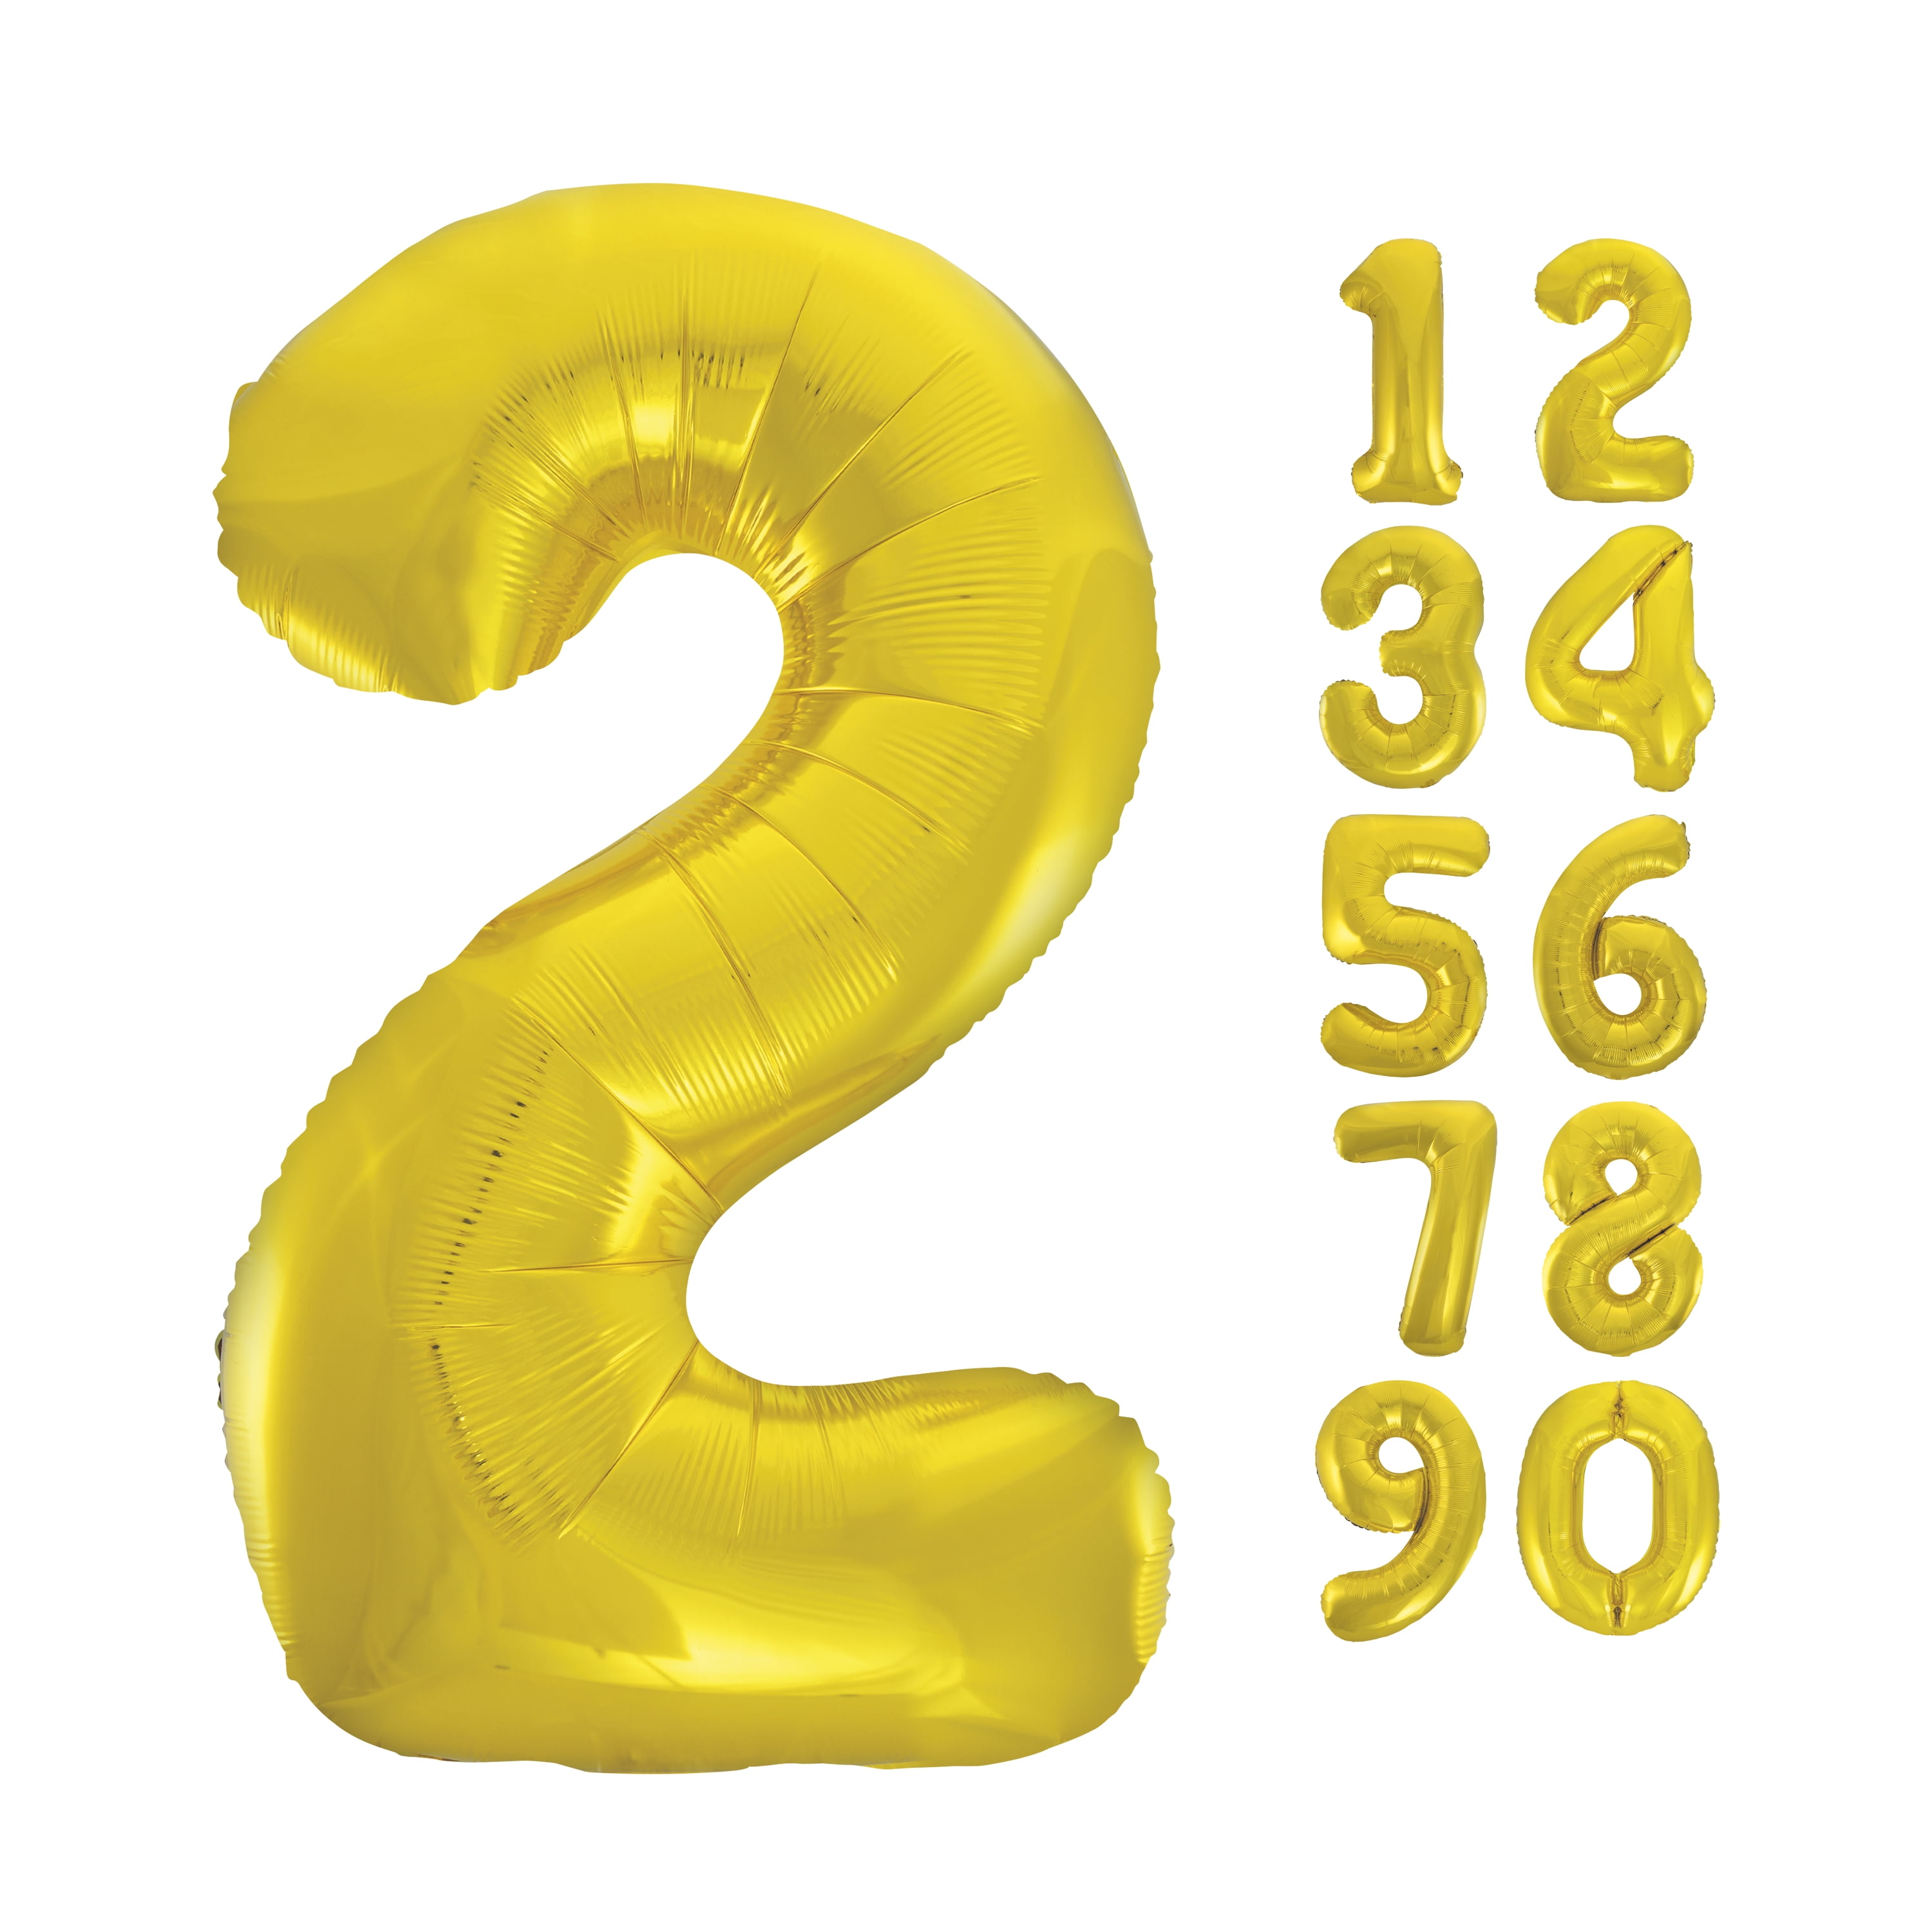 where to get the big number balloons